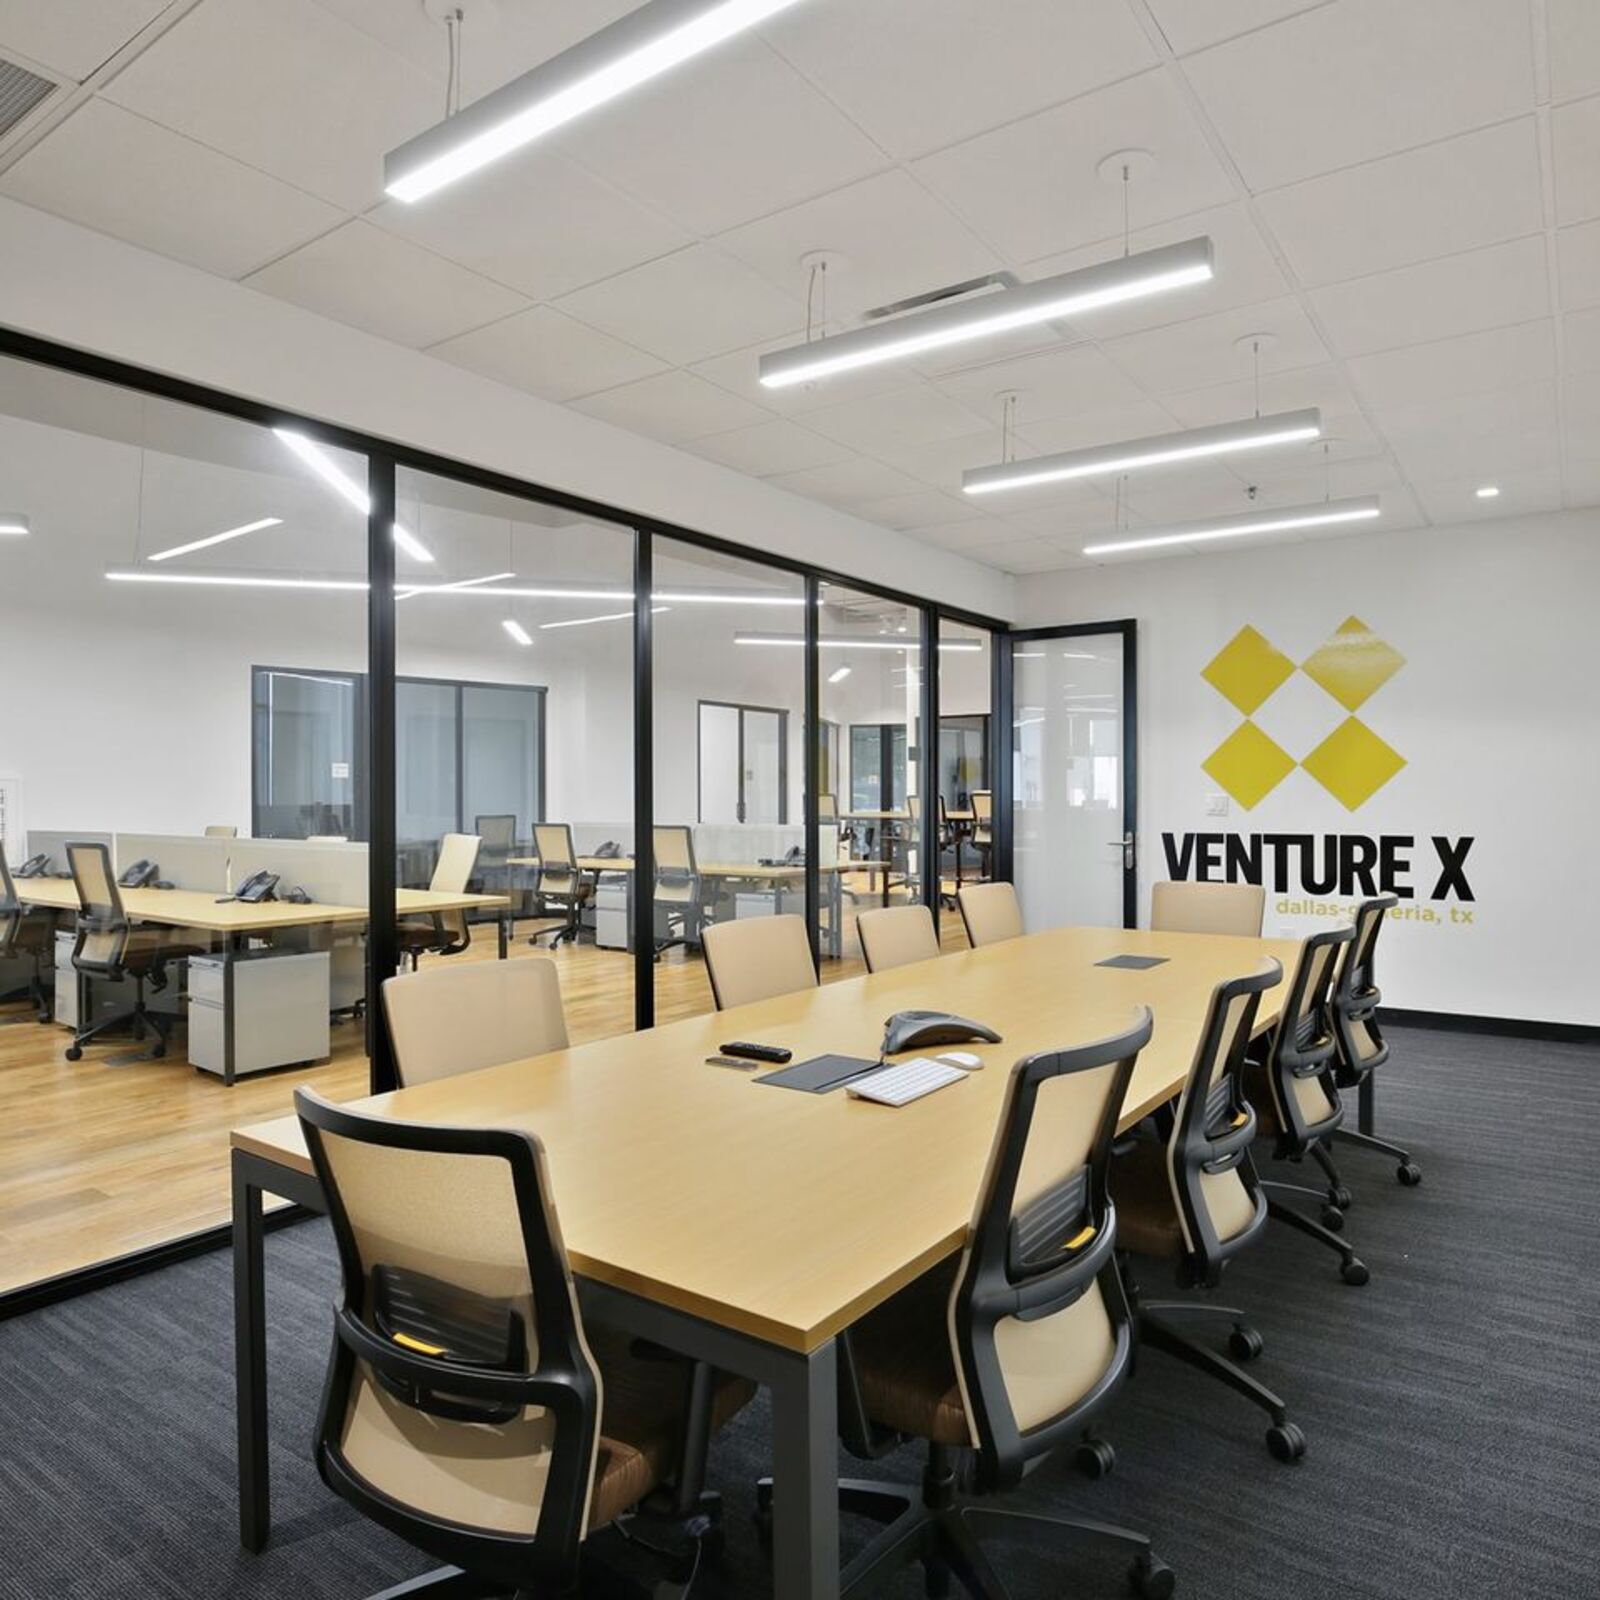 Venture X Dallas by Galleria  State-of-the-Art Conference Rooms